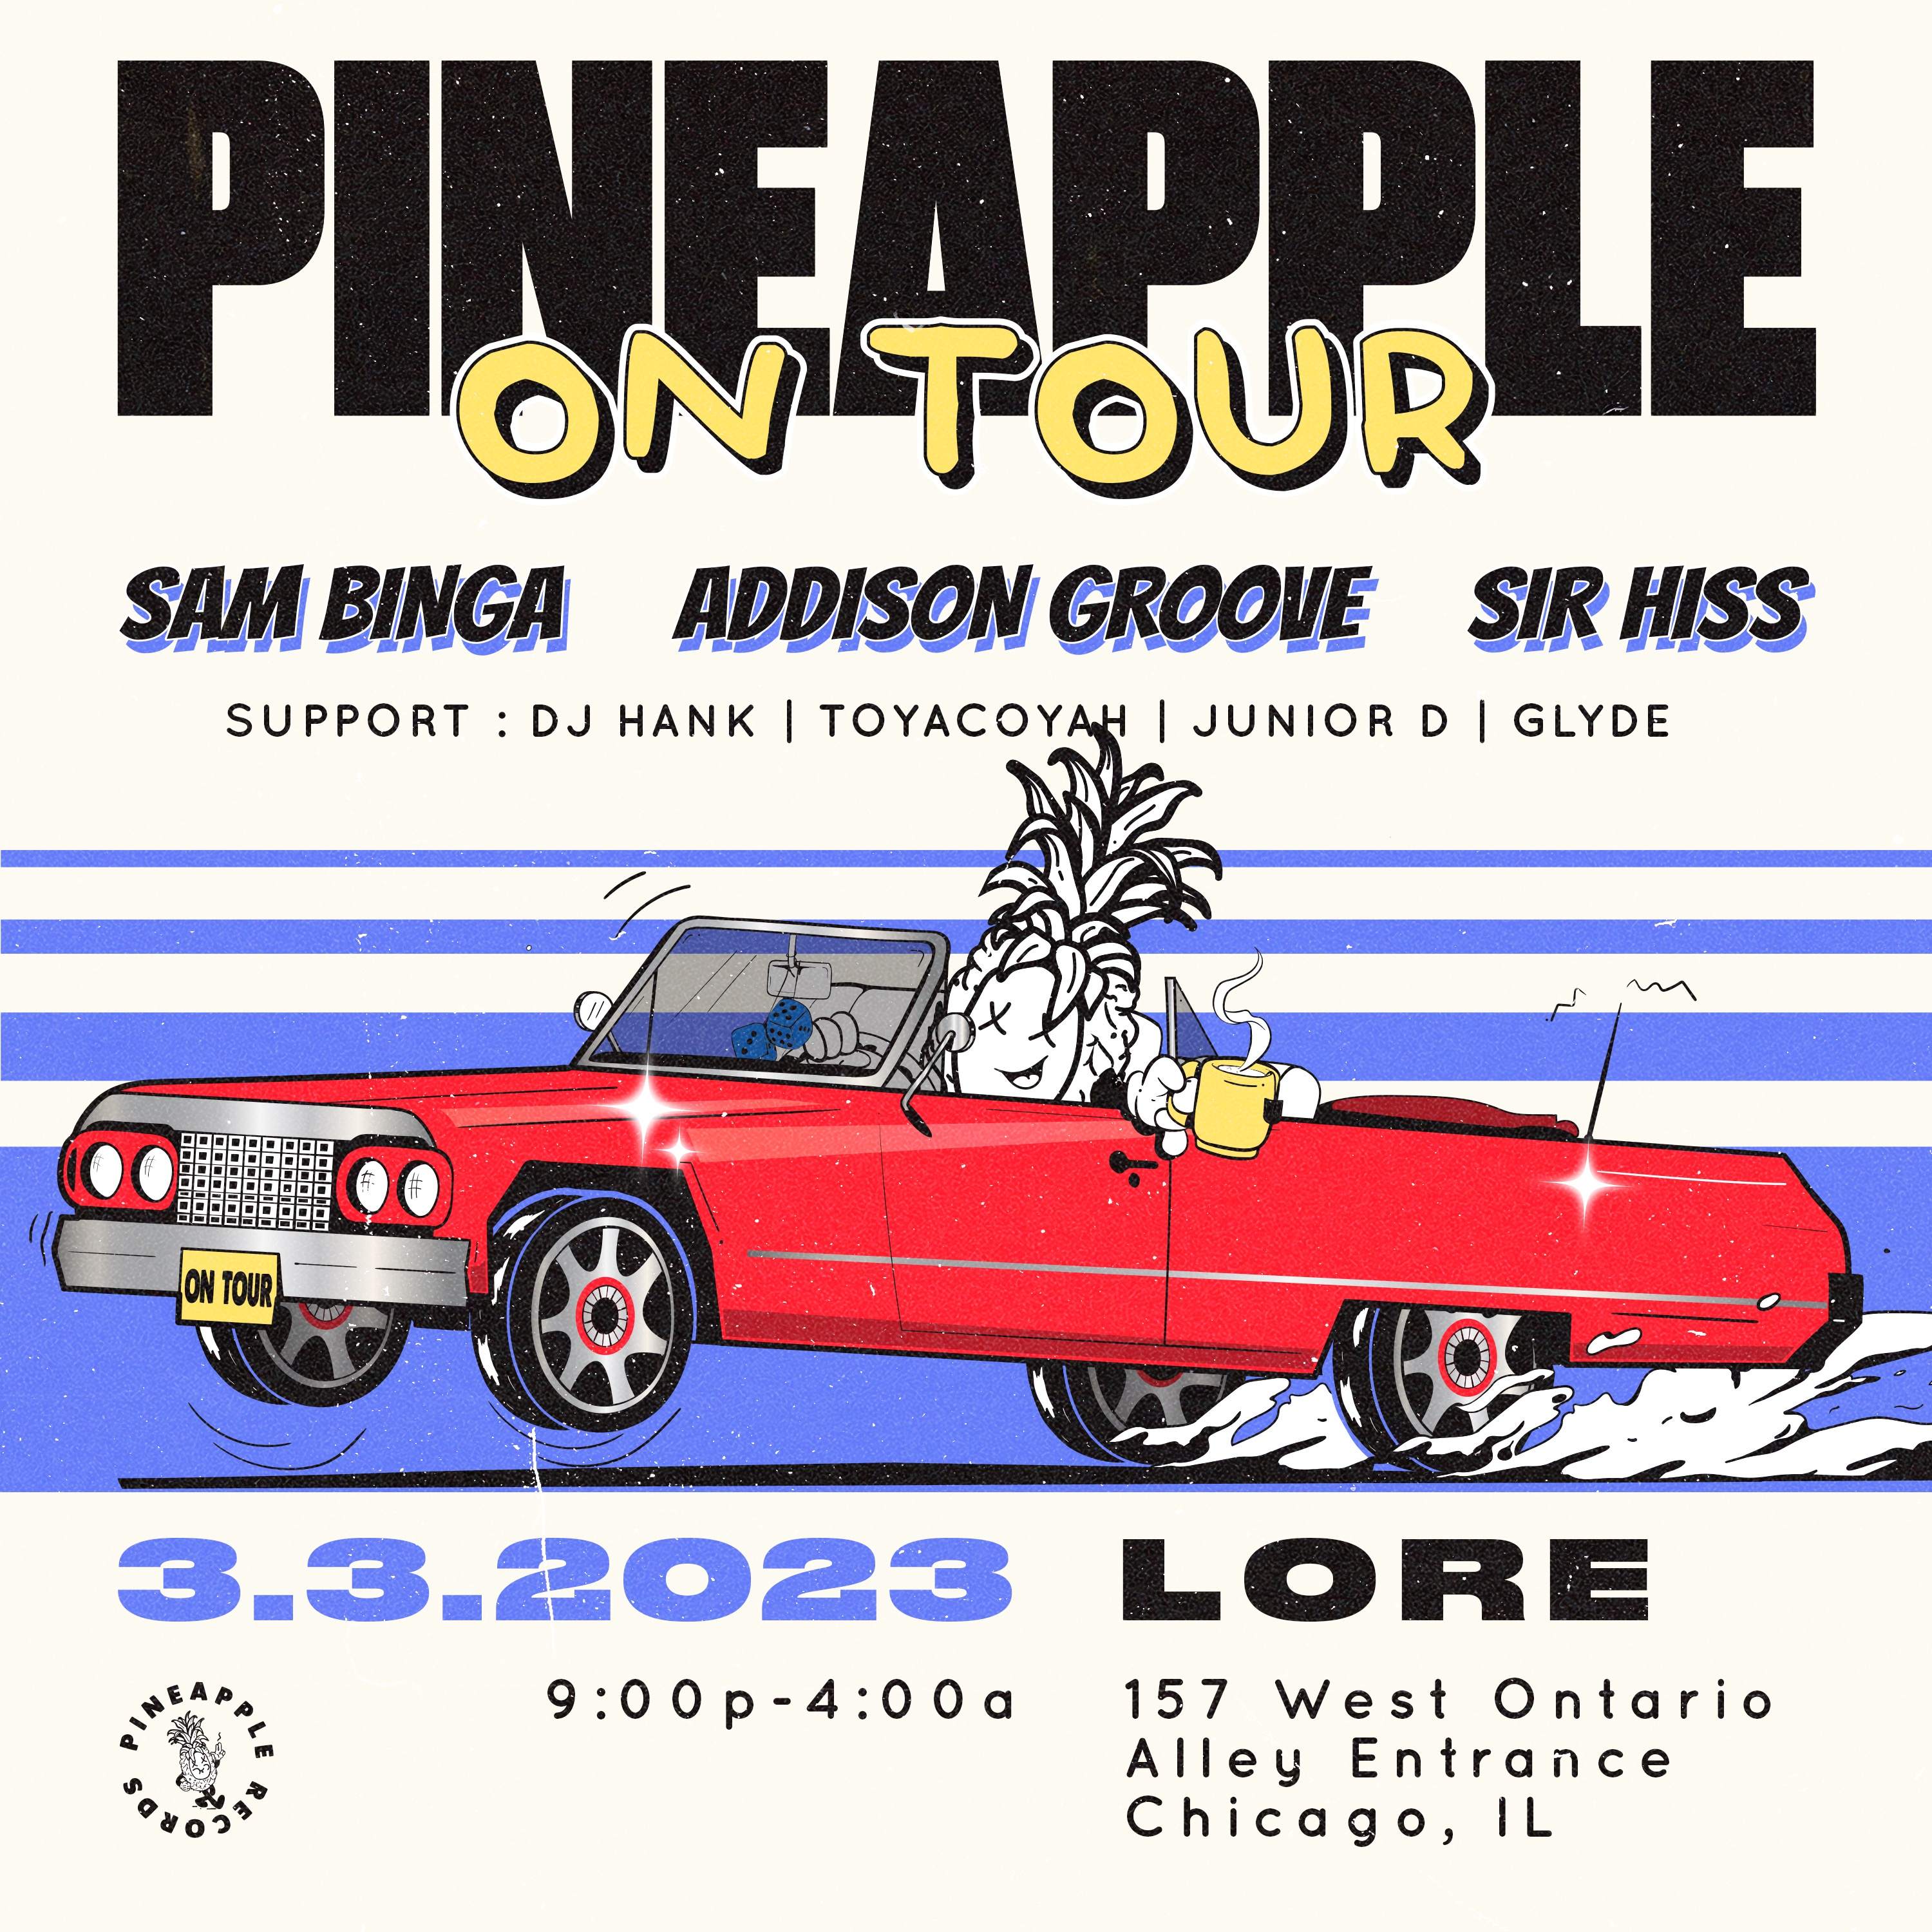 PINEAPPLE RECORDS ON TOUR - フライヤー表